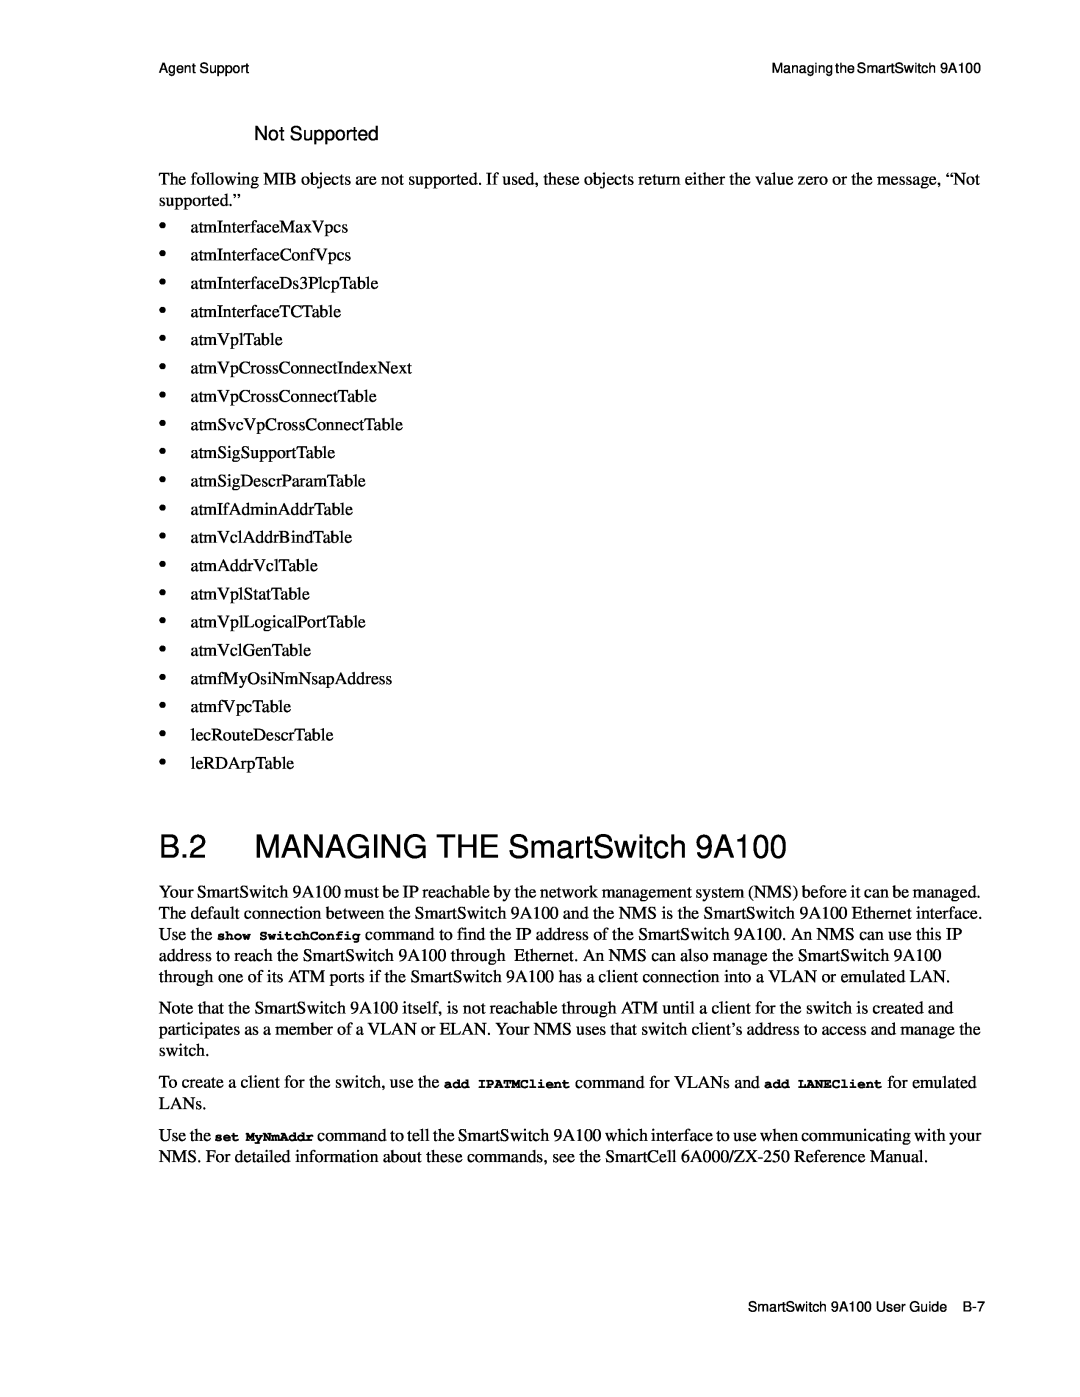 Cabletron Systems manual B.2 MANAGING THE SmartSwitch 9A100, Not Supported 